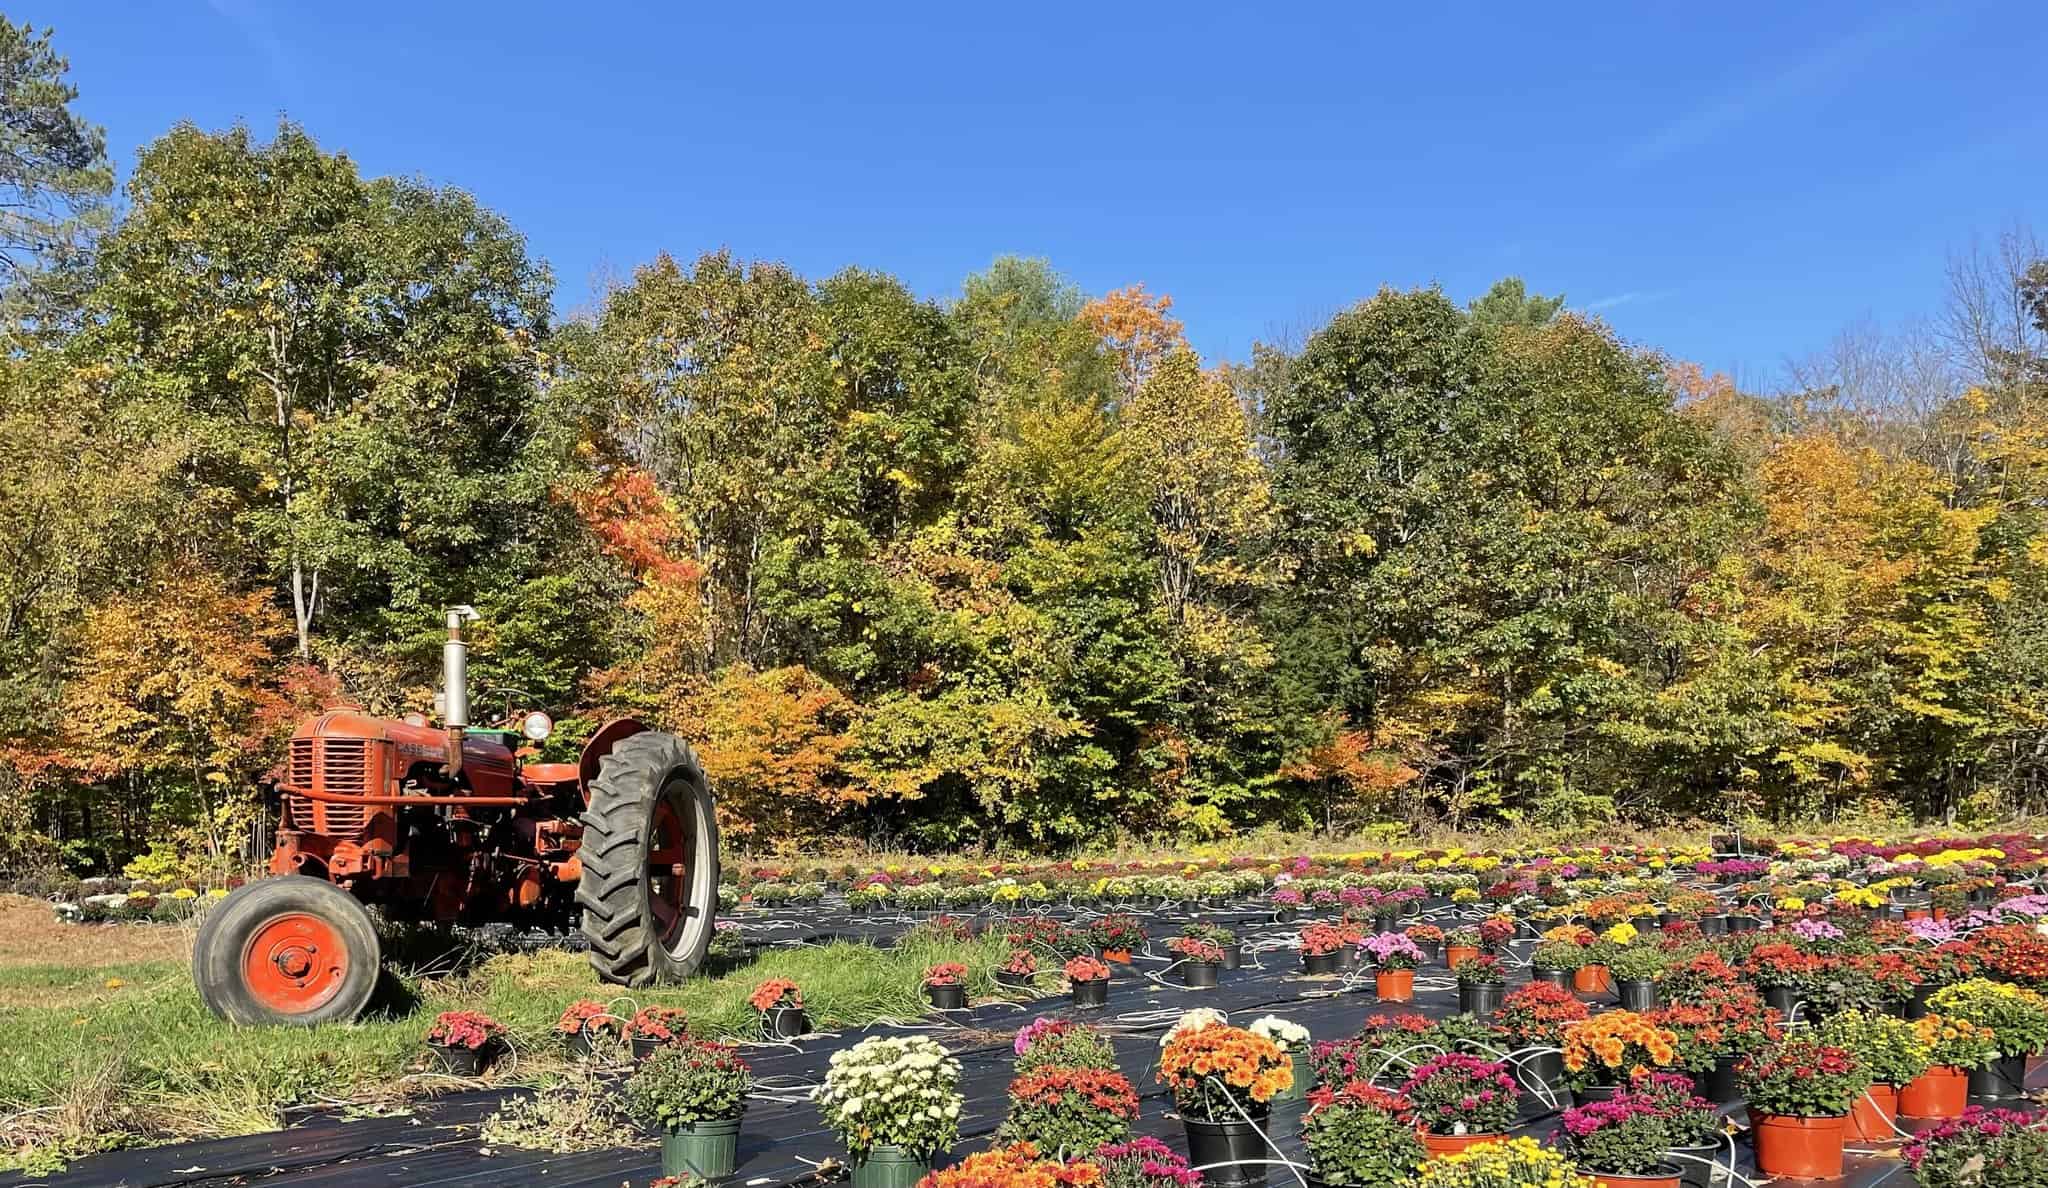 Dutton Berry Farm - Fall Tractor and Flowers